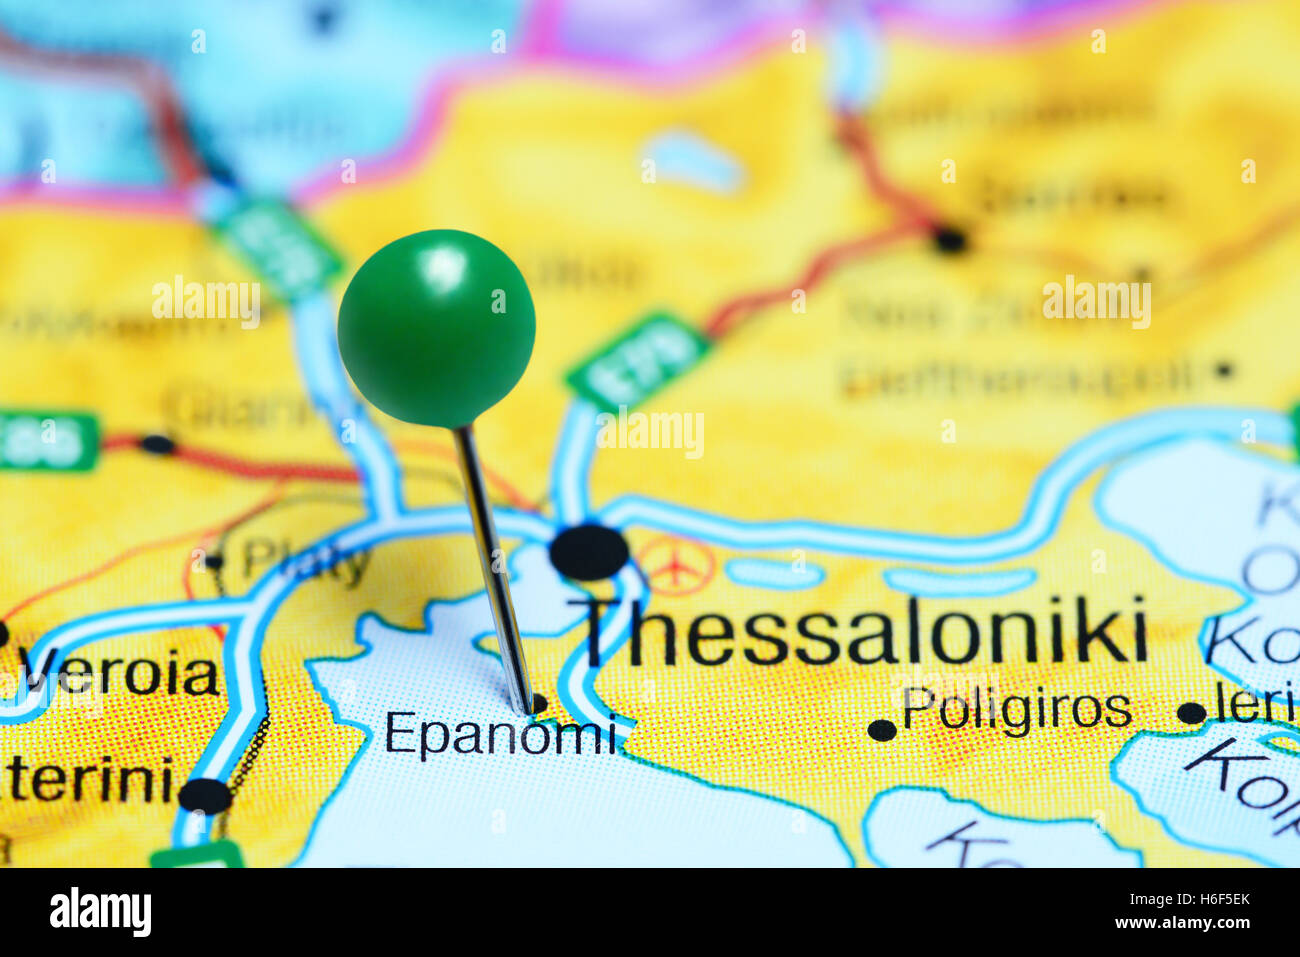 Epanomi pinned on a map of Greece Stock Photo